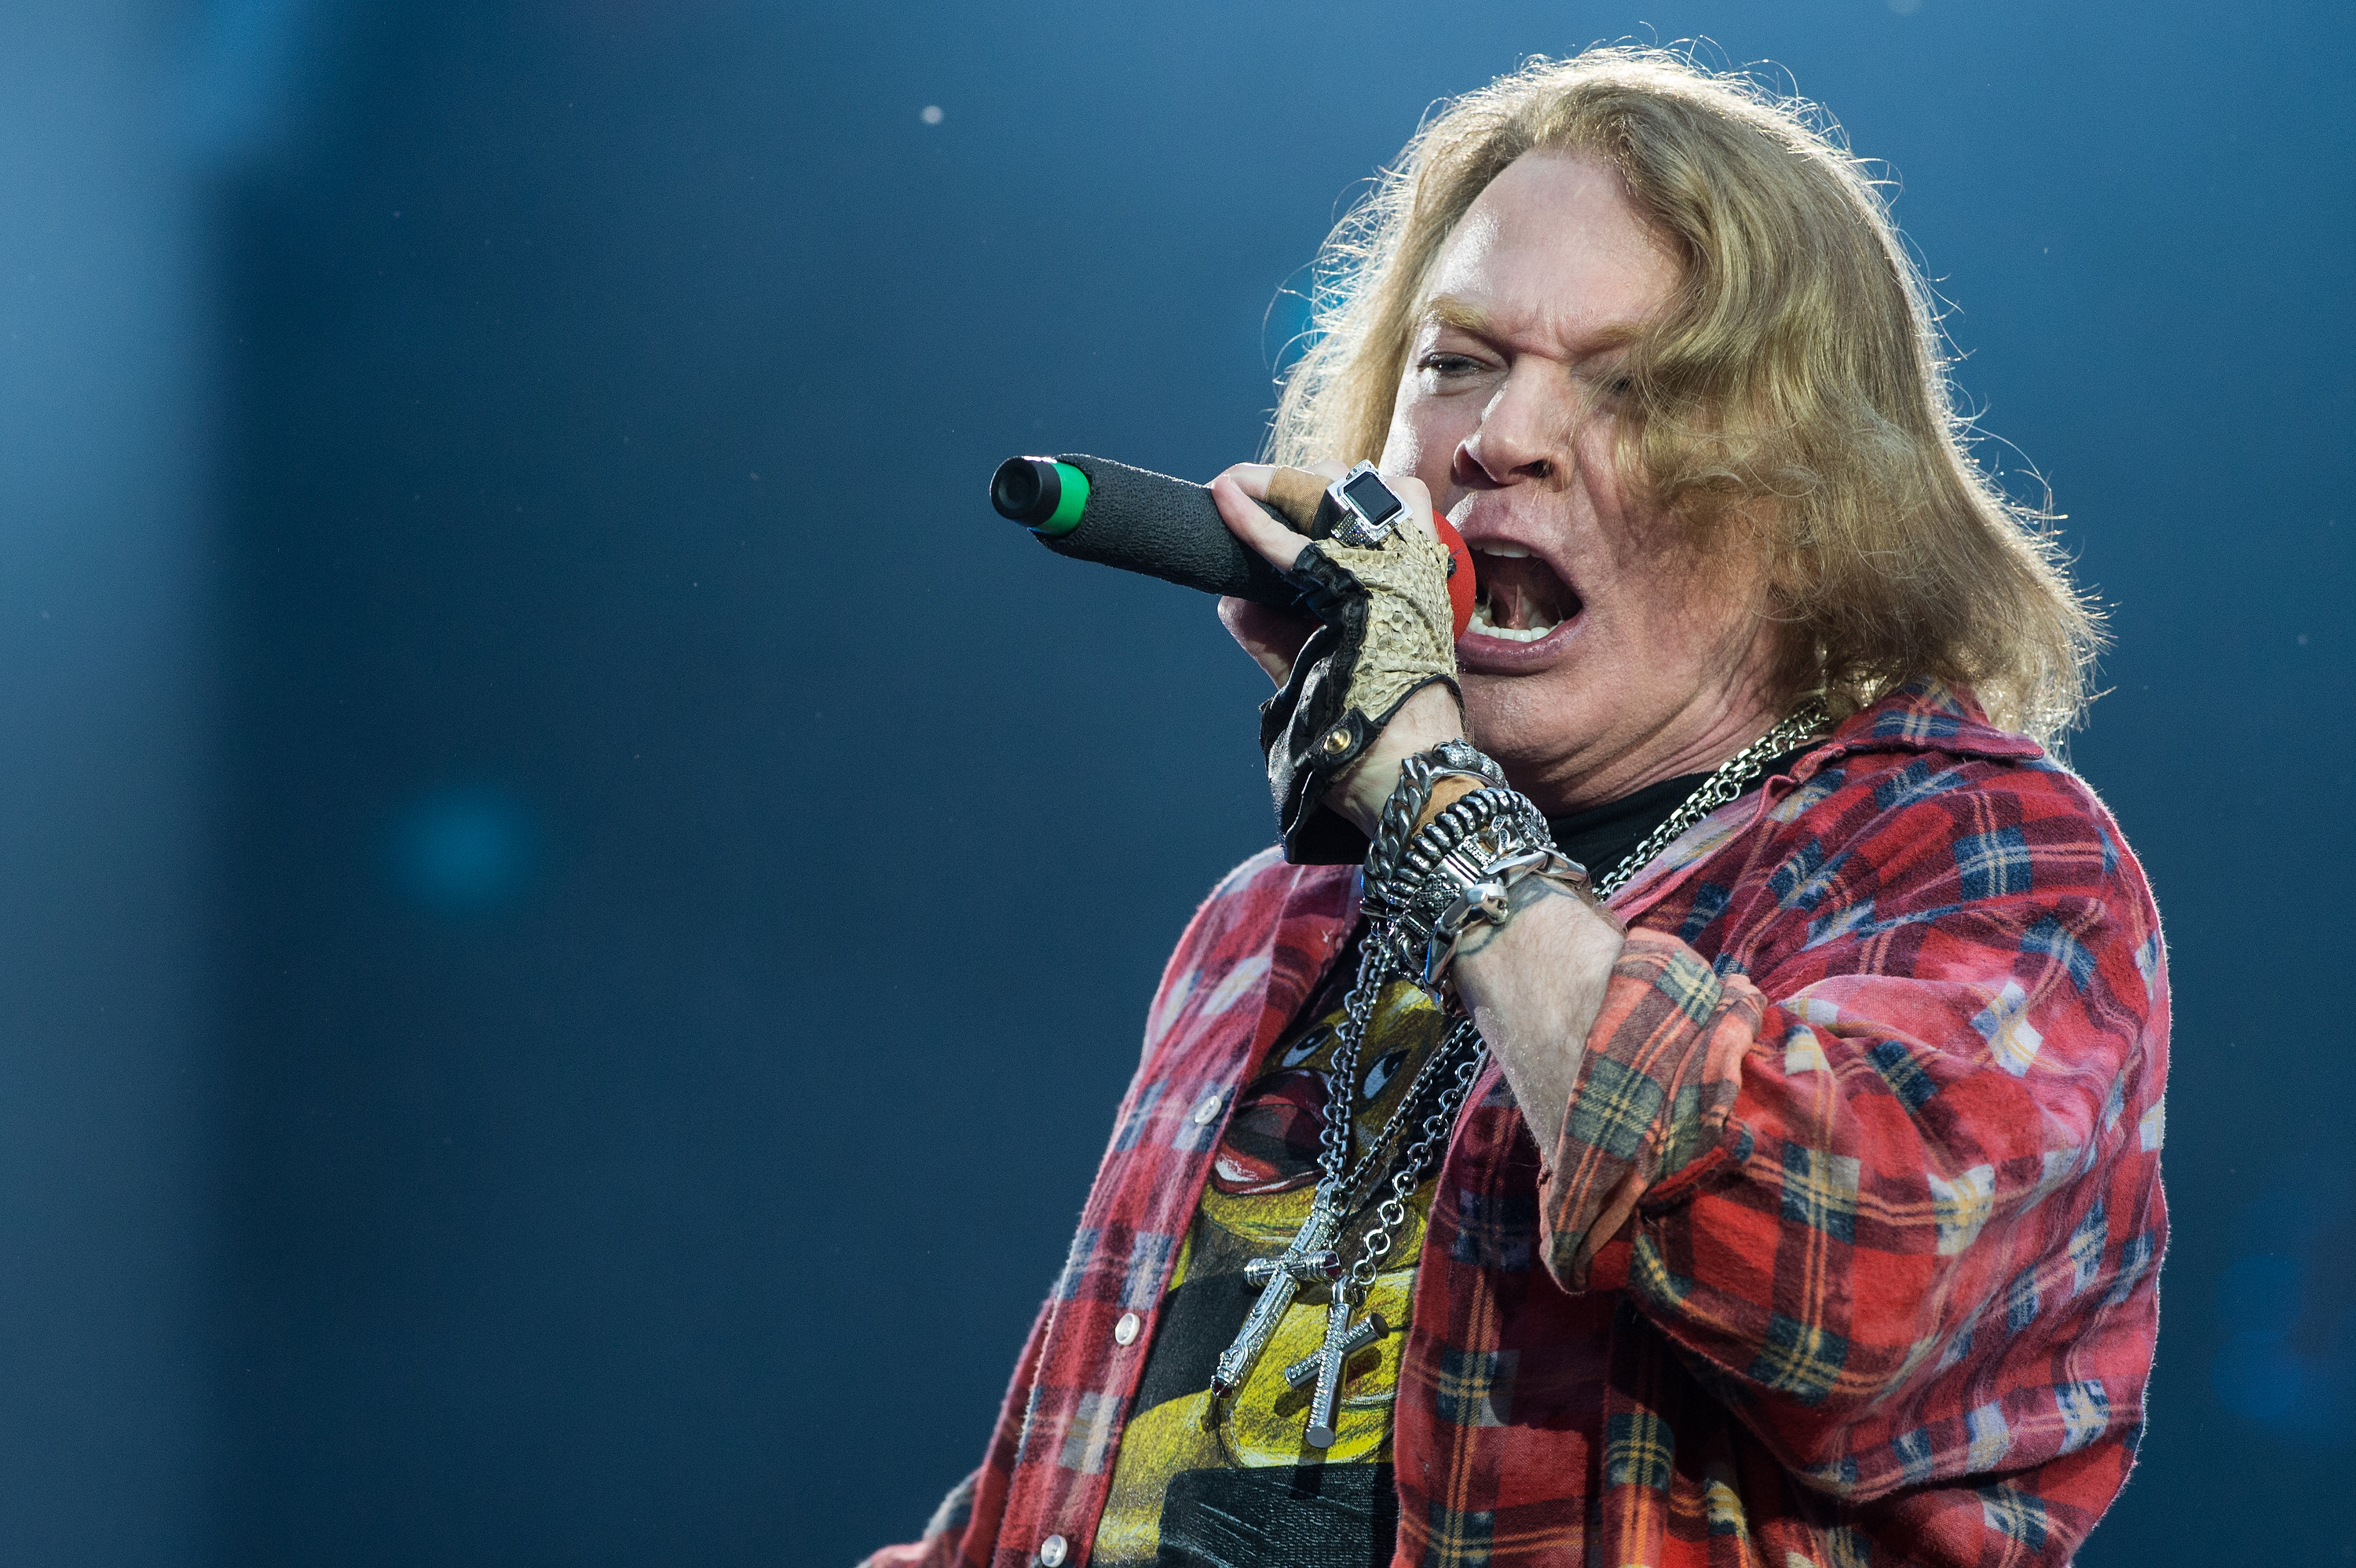 LONDON, ENGLAND - JUNE 04:  Axl Rose of AC/DC performs at Queen Elizabeth Olympic Park on June 5, 2016 in London, England.  (Photo by Brian Rasic/WireImage) (Brian Rasic — Getty Images)